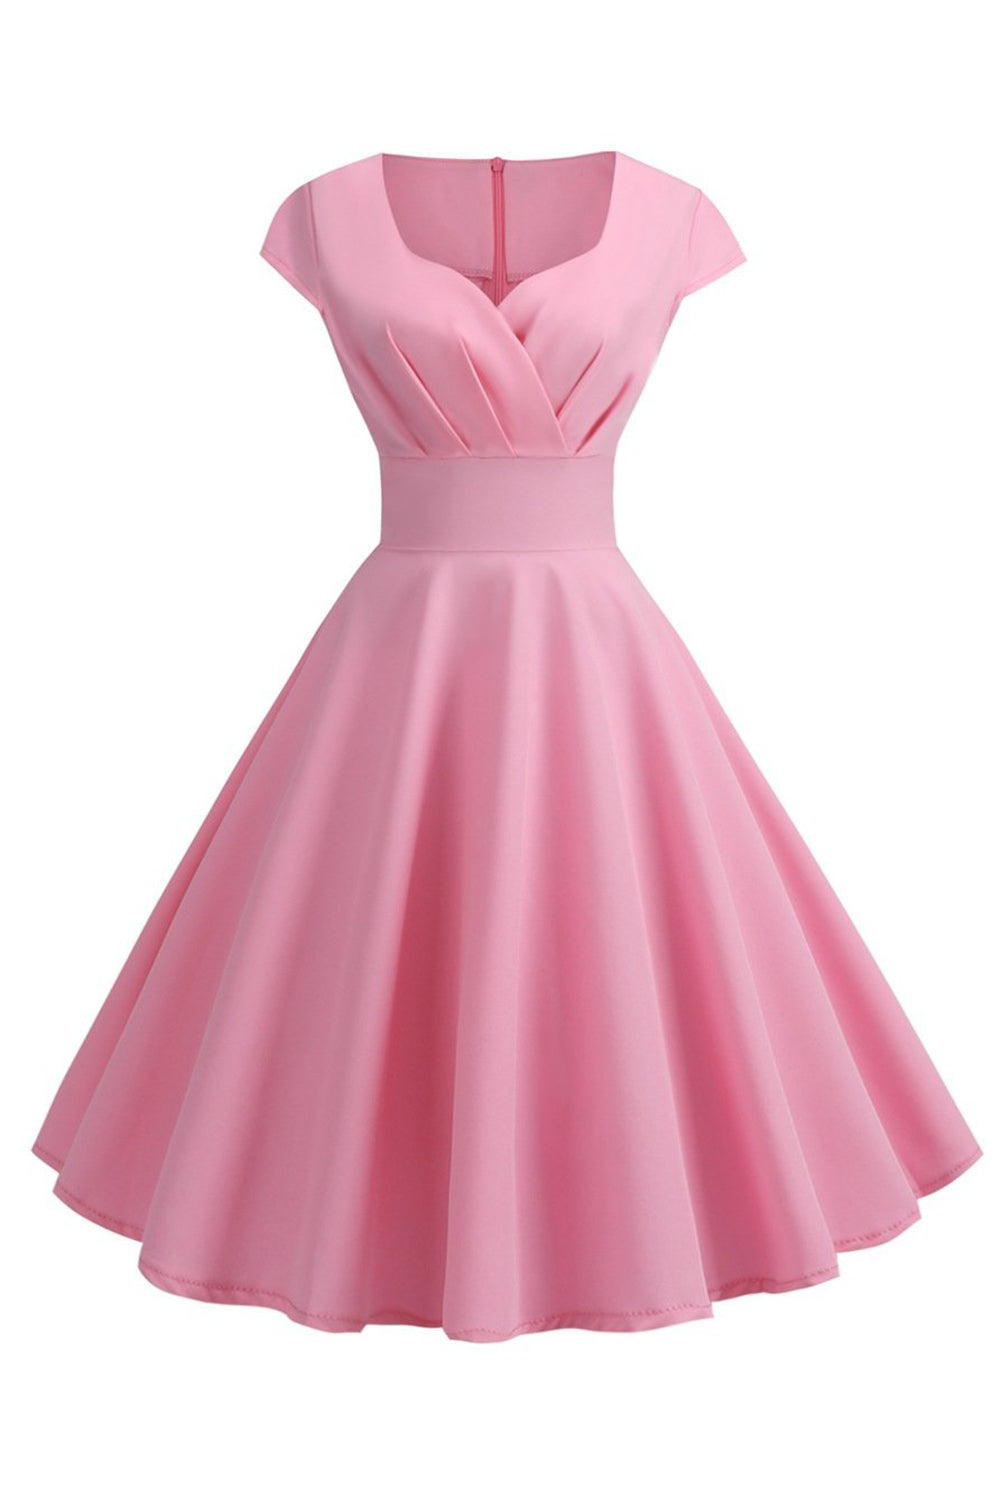 Pink Cap Sleeves A Line 1950s Dress